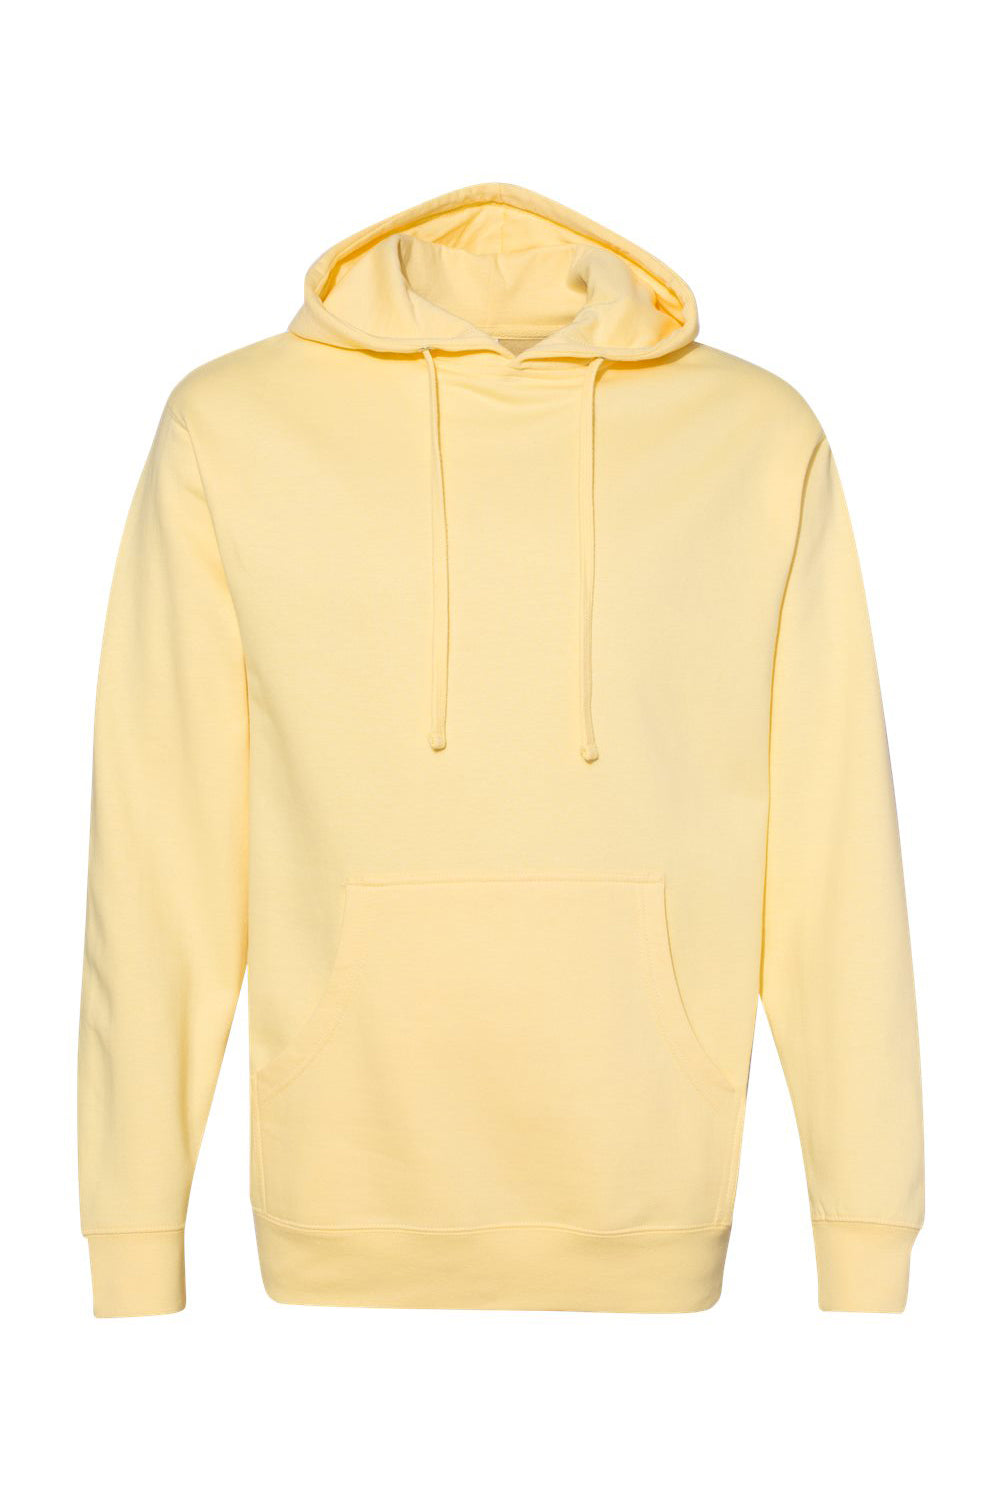 Independent Trading Co. SS4500 Mens Hooded Sweatshirt Hoodie Light Yellow Flat Front